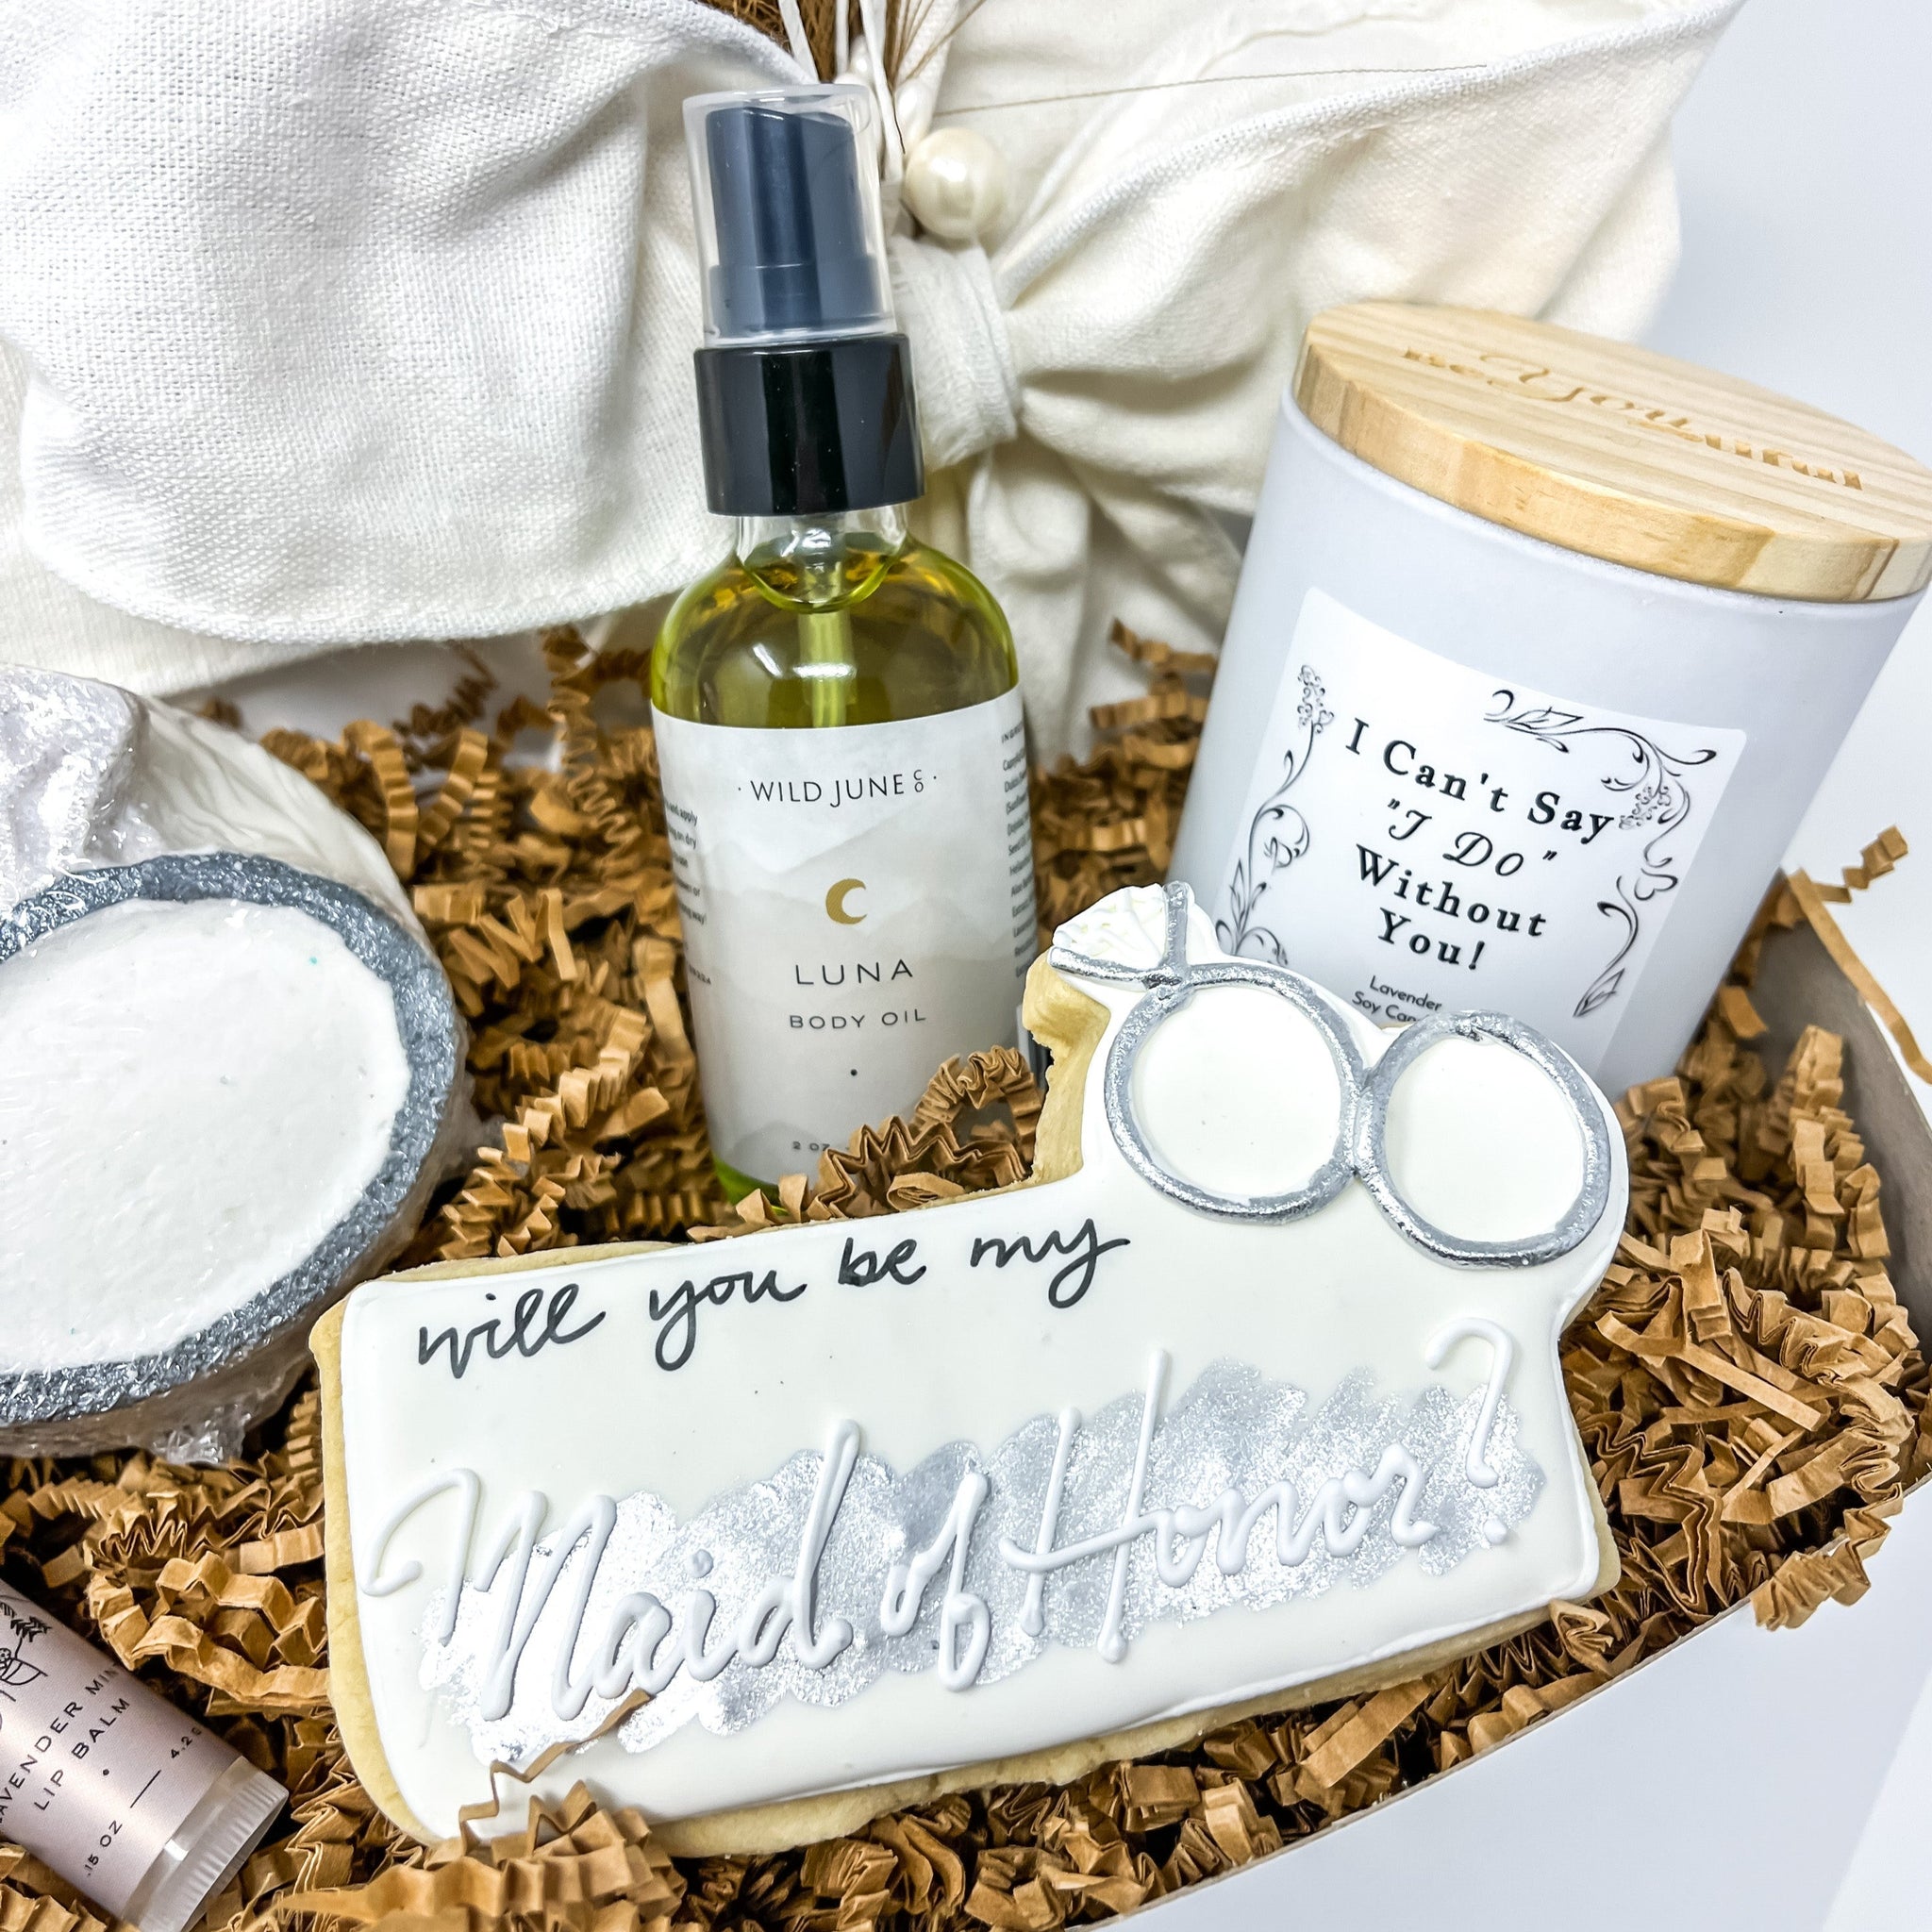 Maid of Honor Proposal Gift Box